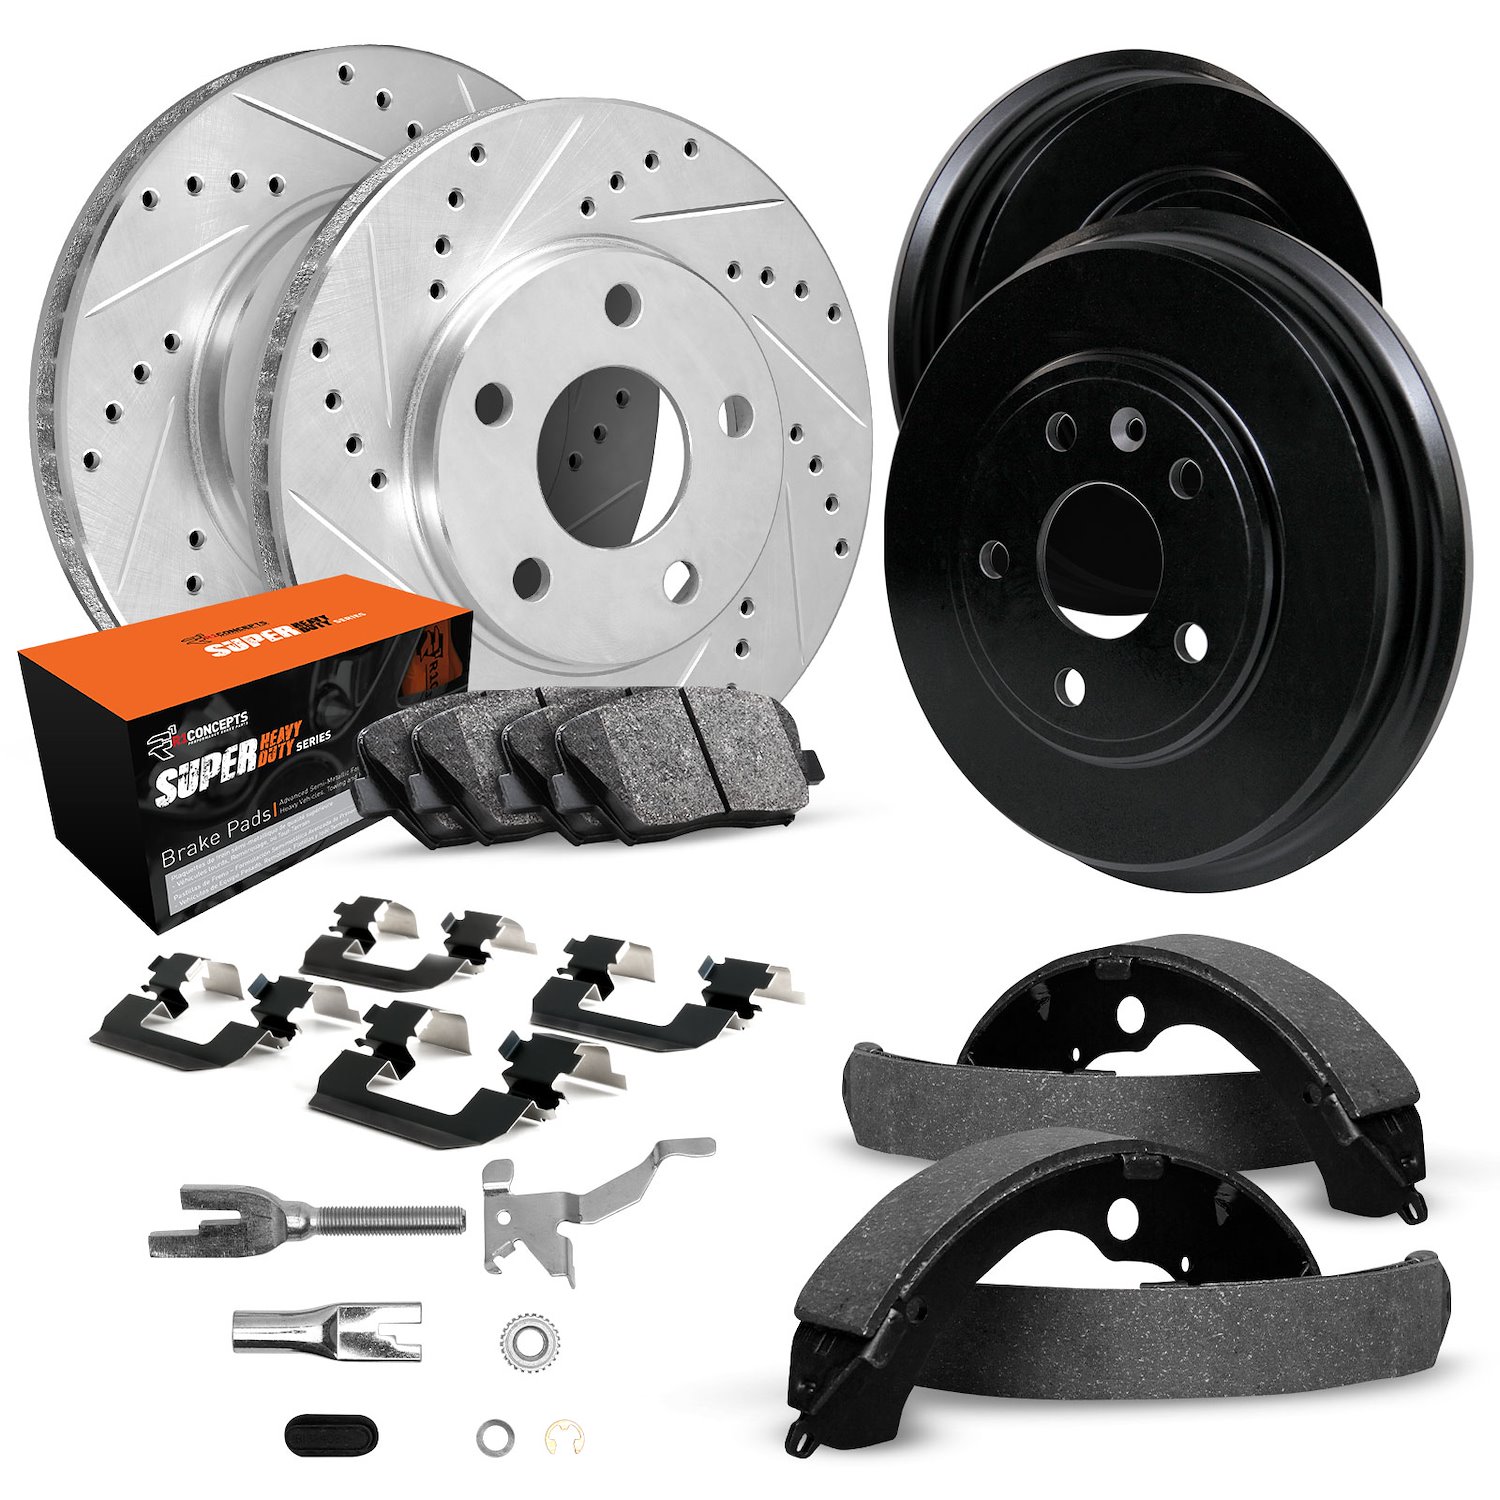 E-Line Drilled/Slotted Silver Rotor & Drum Set w/Super-Duty Pads, Shoes/Hardware/Adjusters, 1995-1996 Ford/Lincoln/Mercury/Mazda